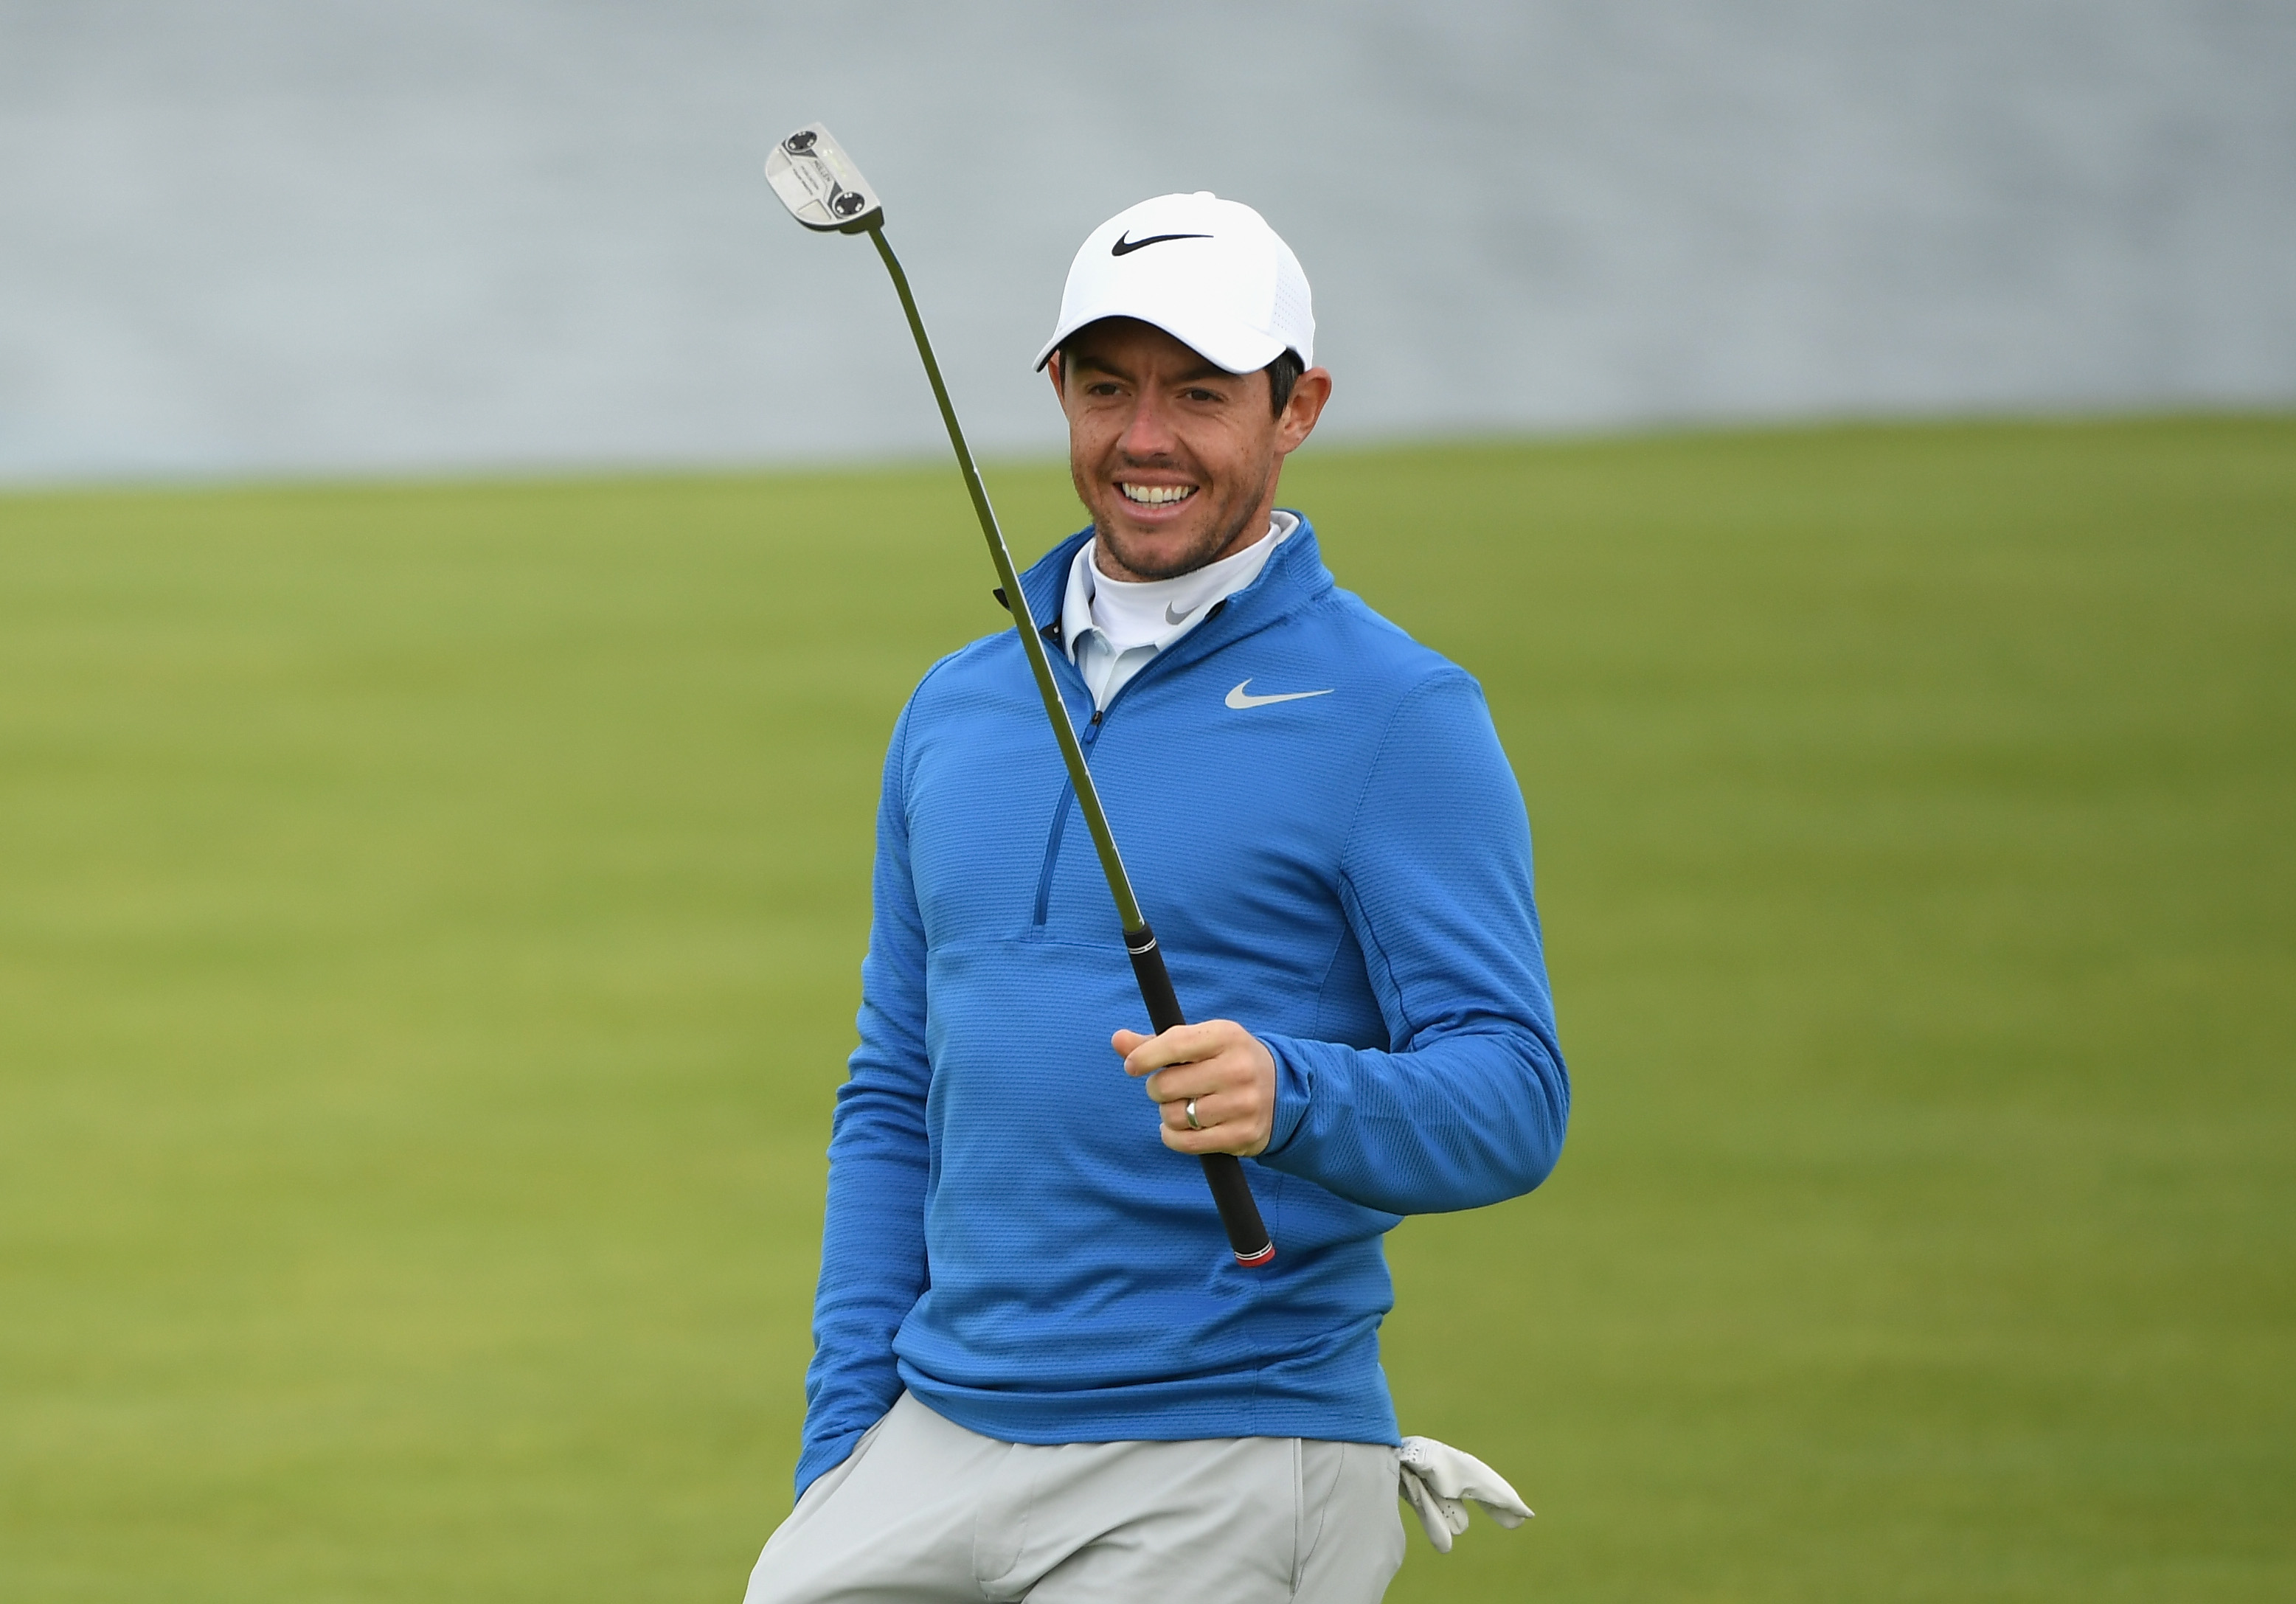 Rory McIlroy has got his putting fixed judging by the looks of this!